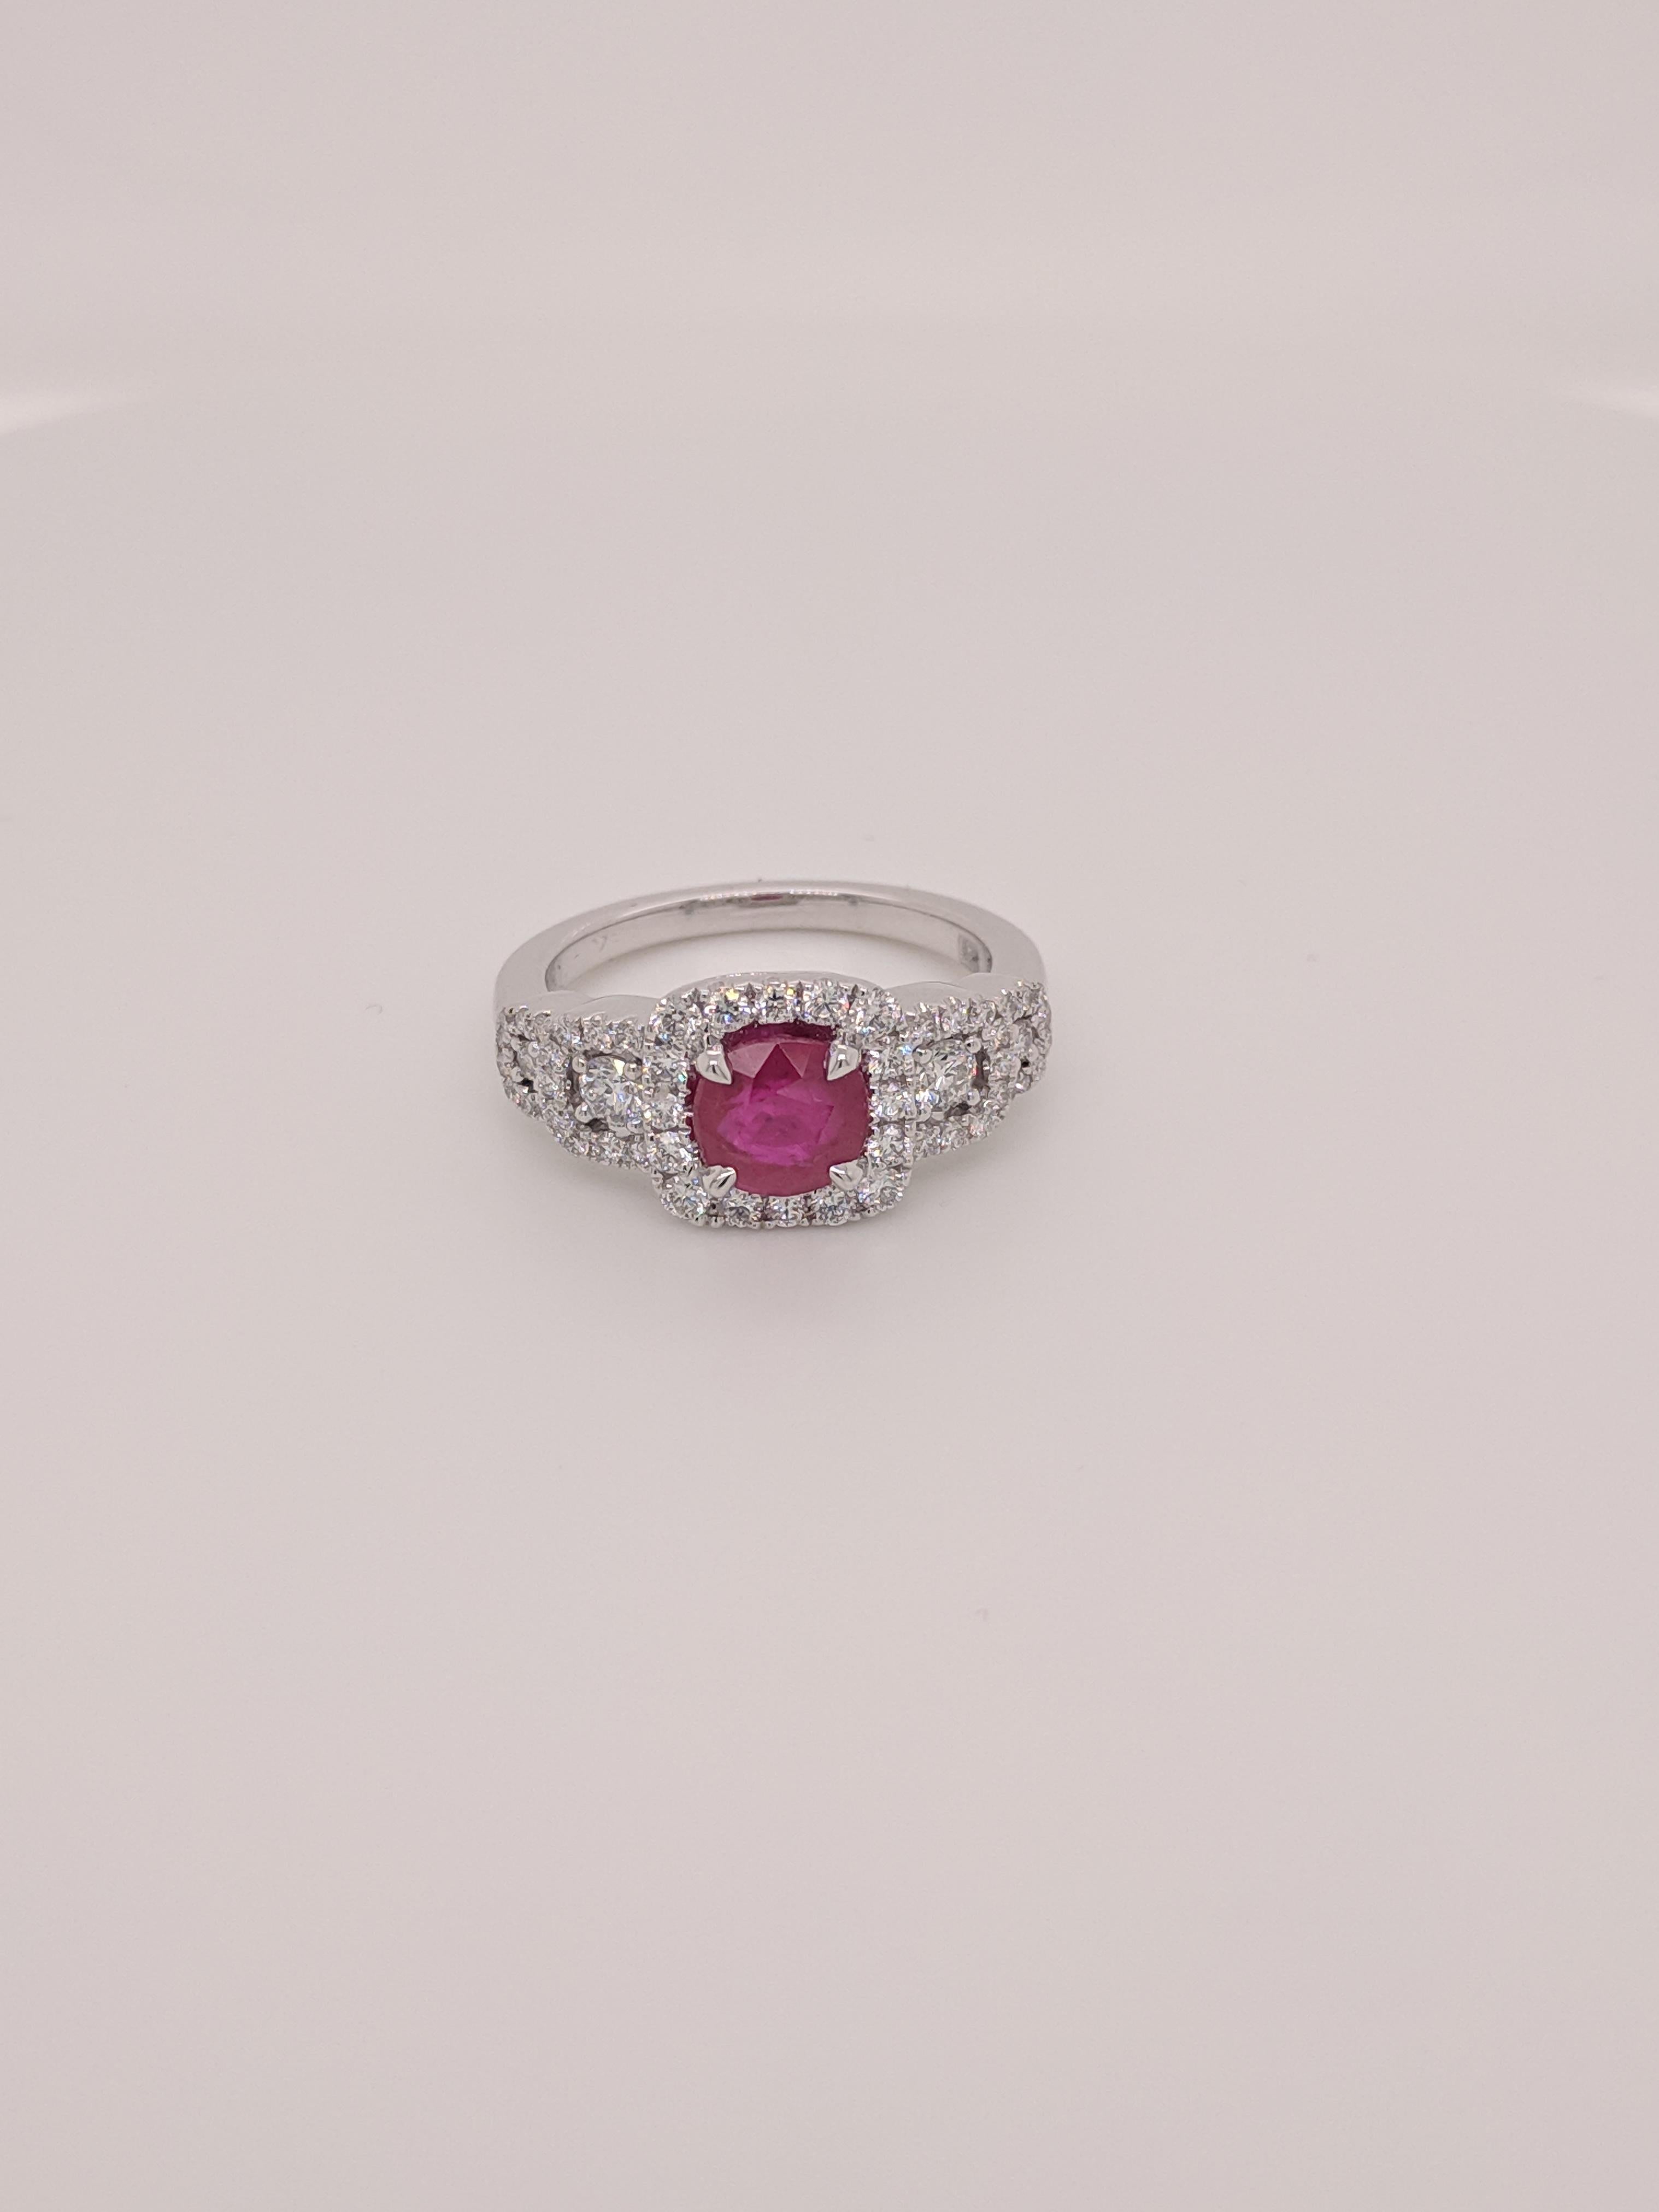 Frederic Sage 1.38 Carat Ruby and Diamond Ring In New Condition For Sale In New York, NY